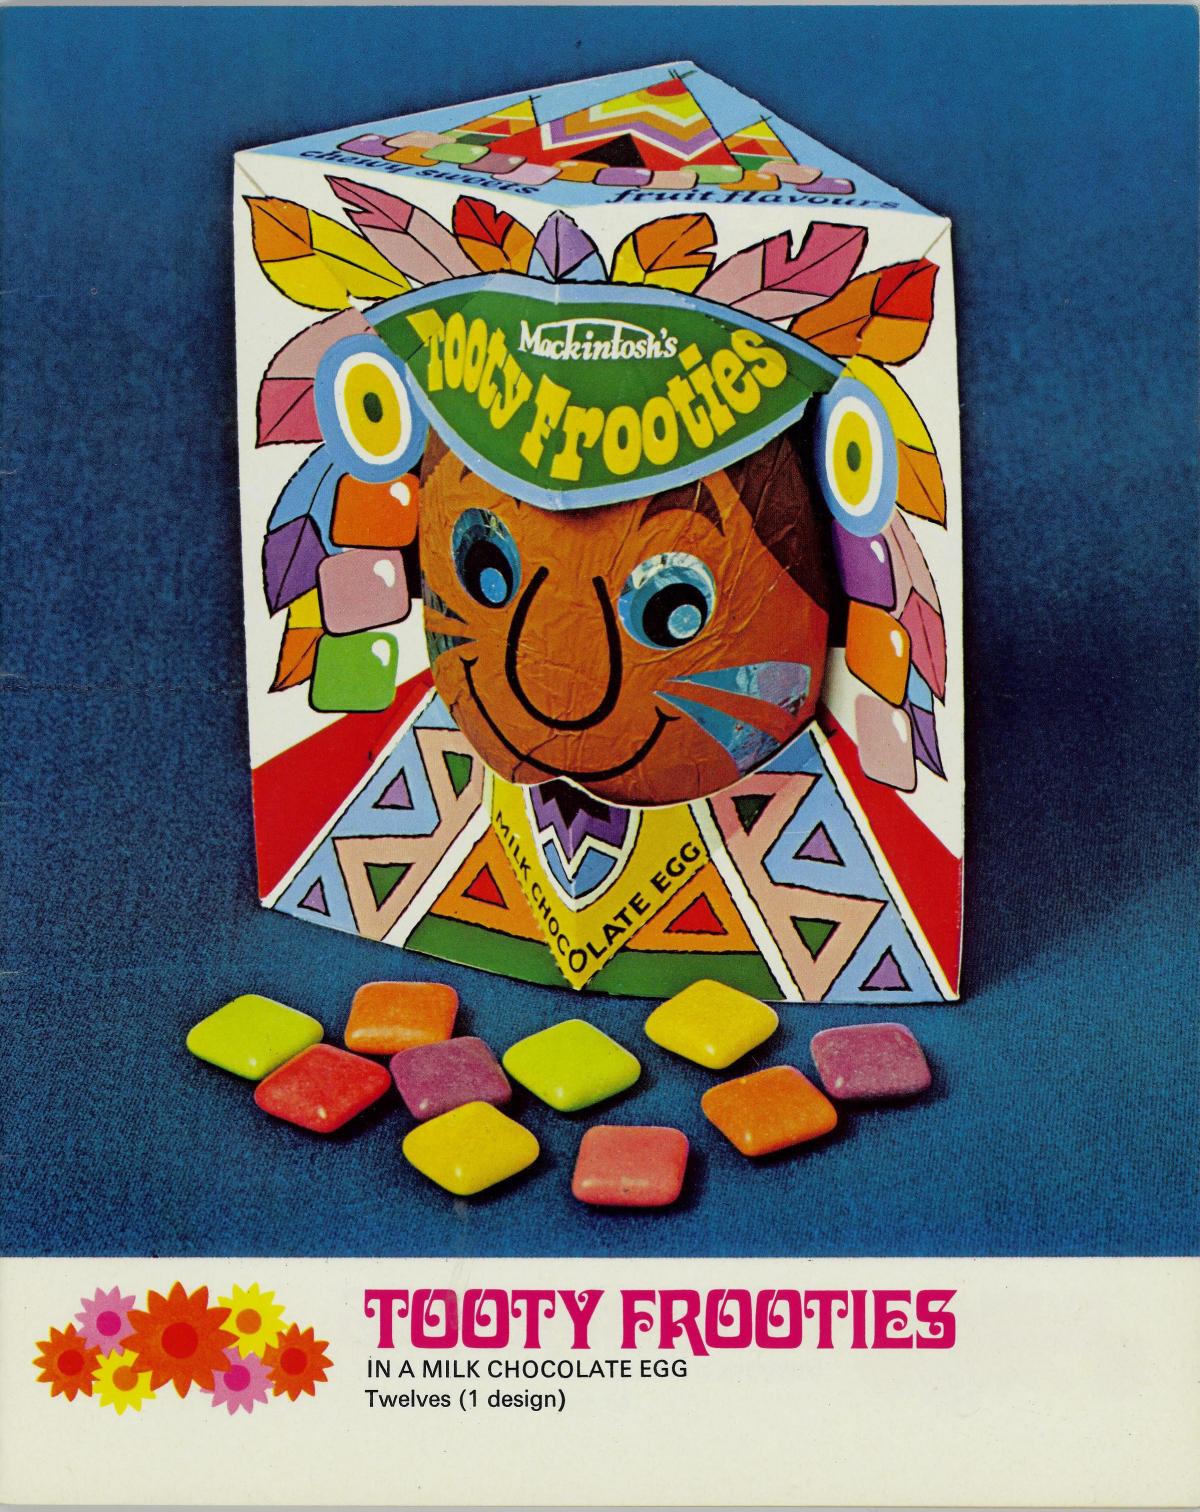 How many of these Rowntree Easter Eggs from the 1970s, 80s and 90s